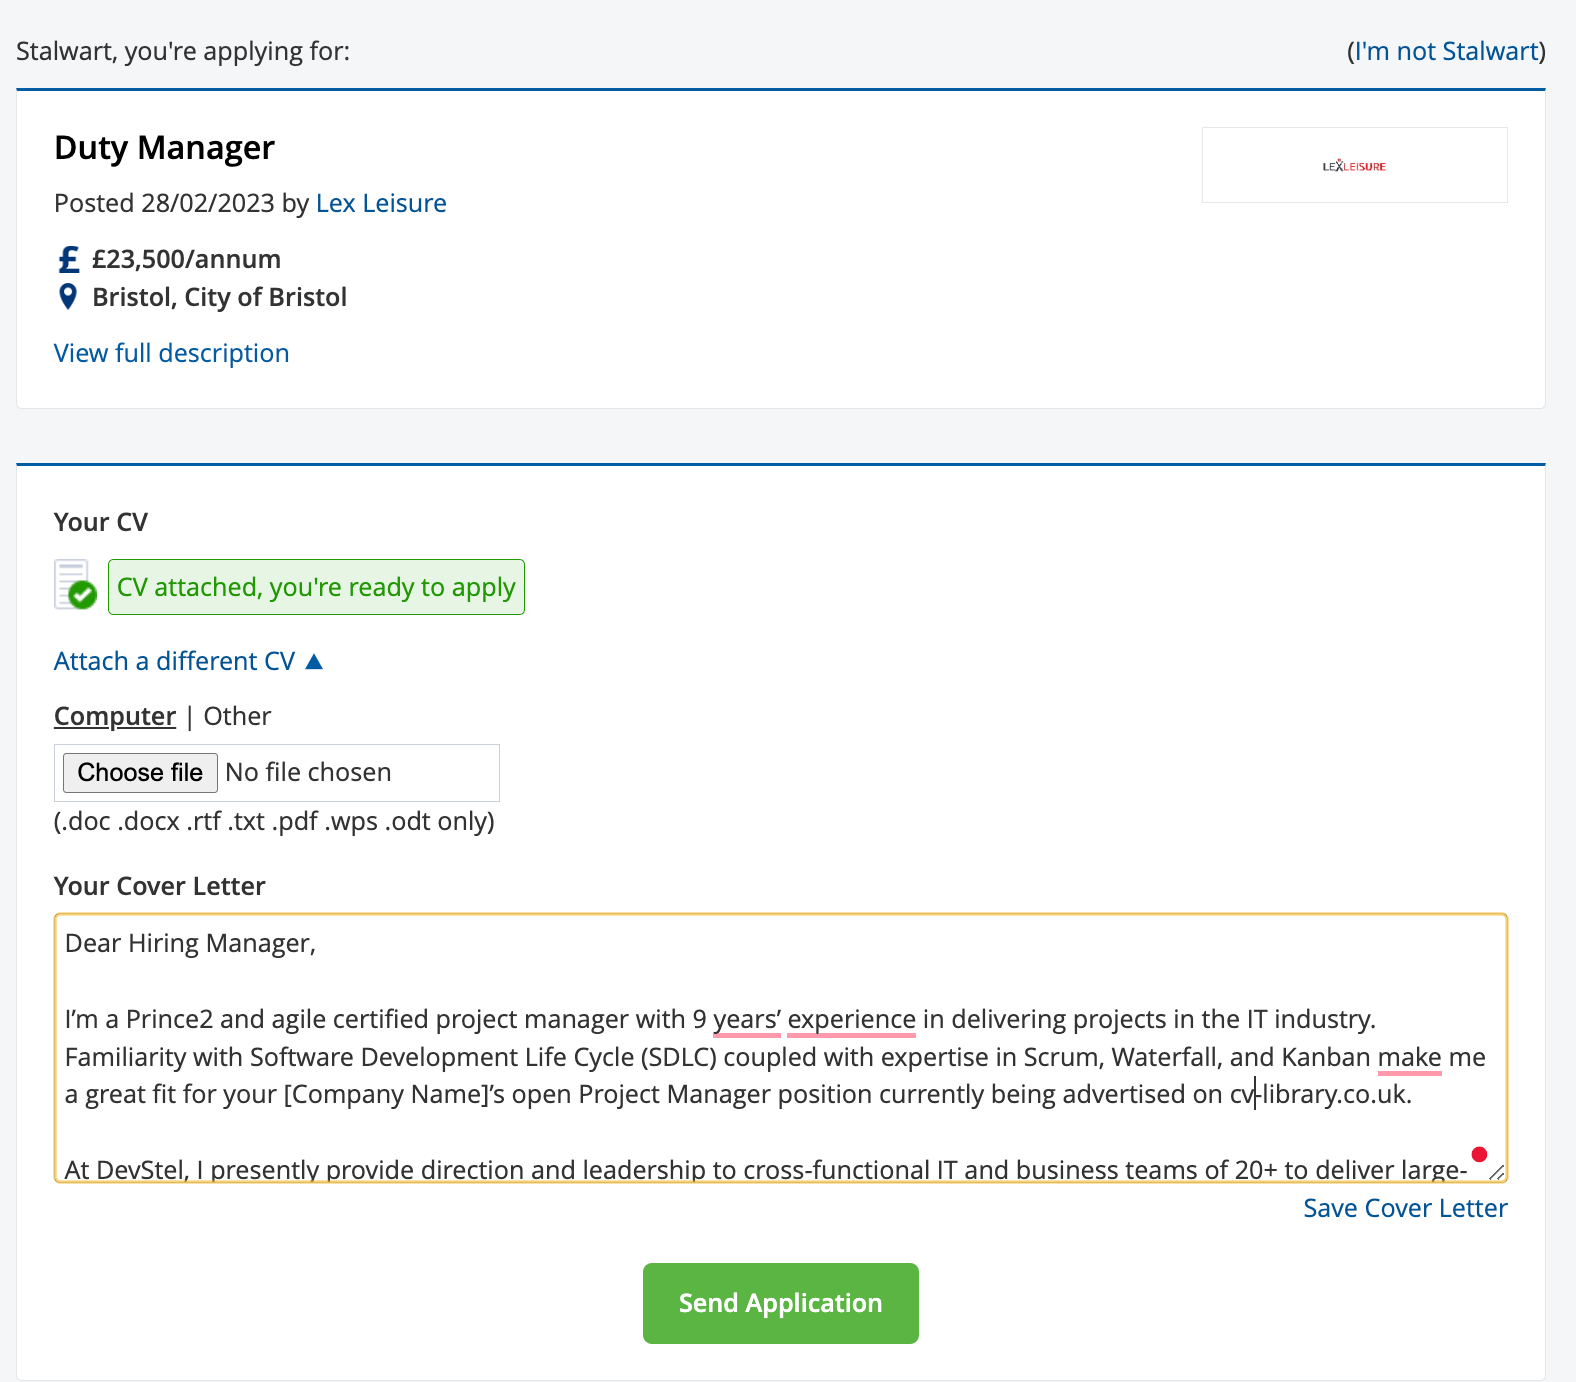 After clicking 'Apply Now', users are presented with a screen where they can pick a CV and write a cover letter.